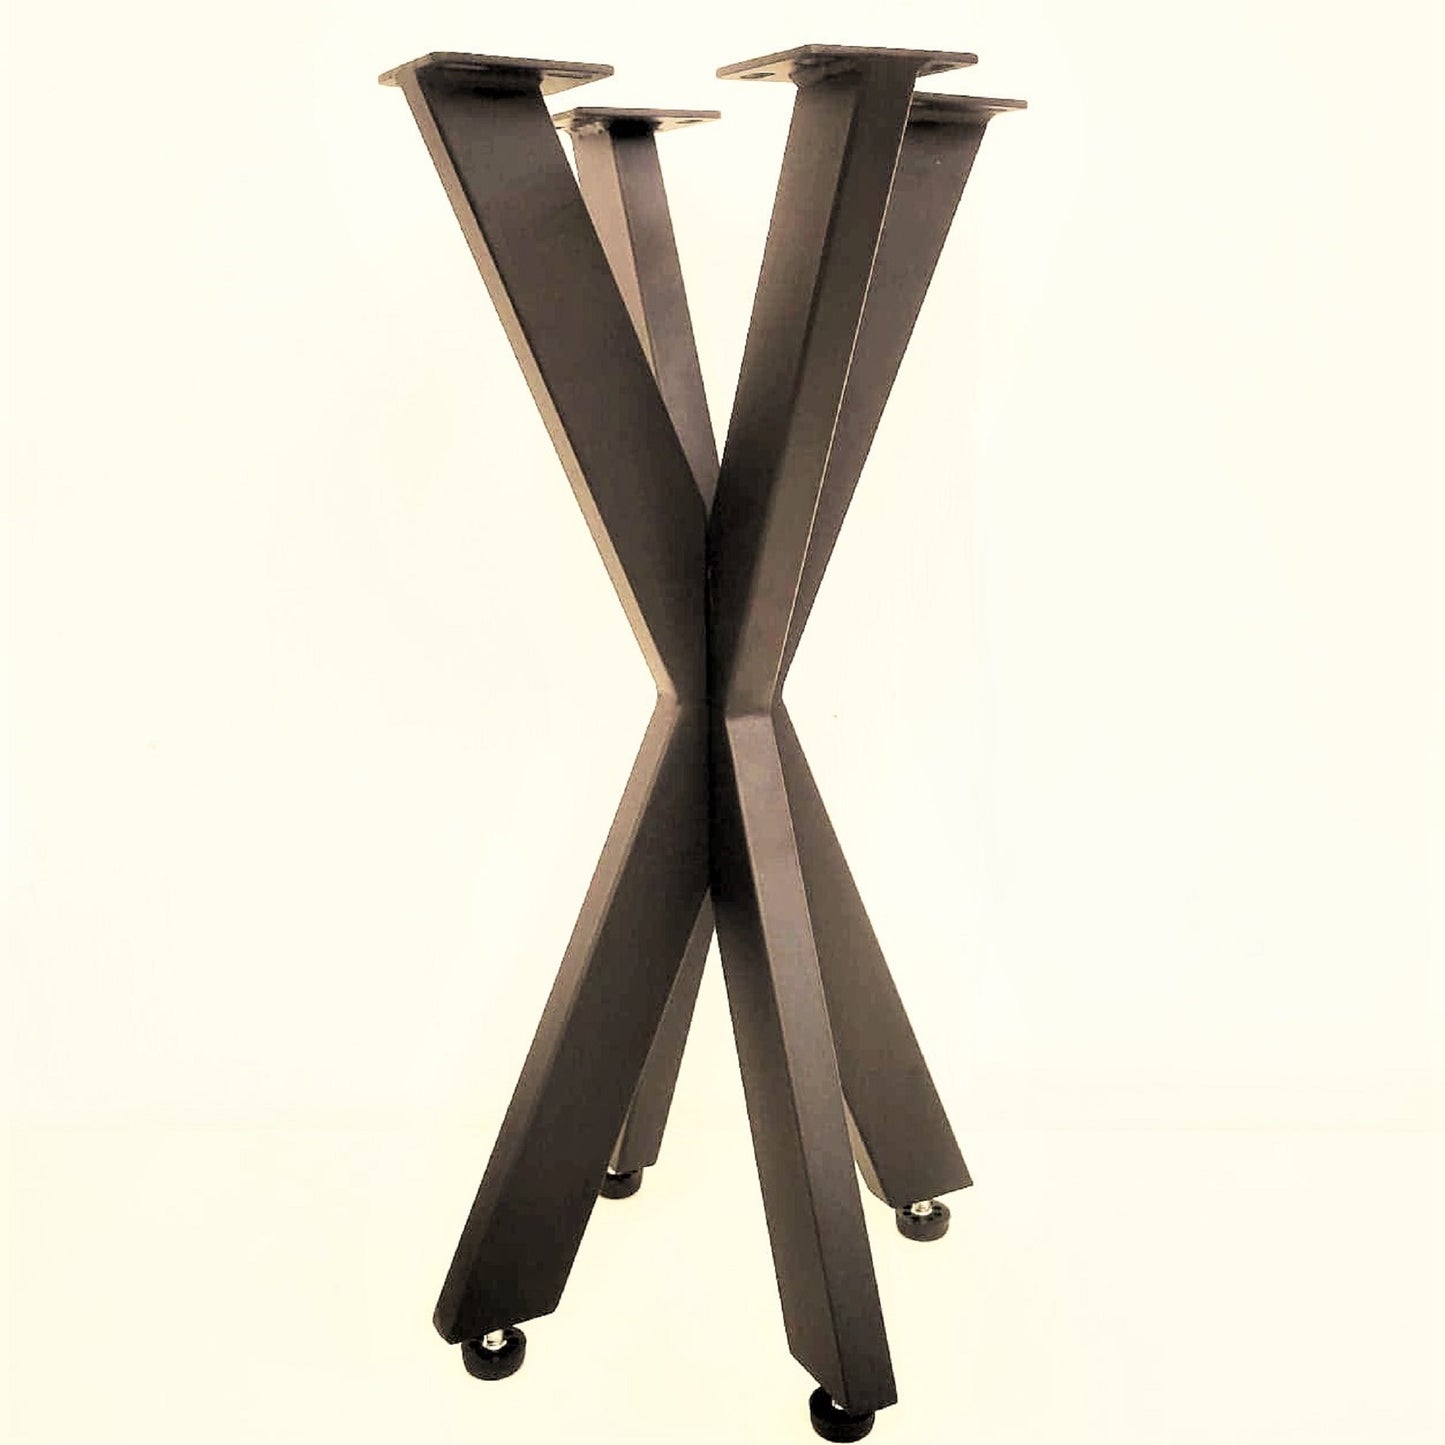 Spider End Table Legs, Spider Furniture Legs, Furniture Feet, Spider Metal Legs, Spider Steel Table Legs, Bench Legs, Metal Bench Base, Heavy Duty Bench Legs, Heavy Duty Bench Base